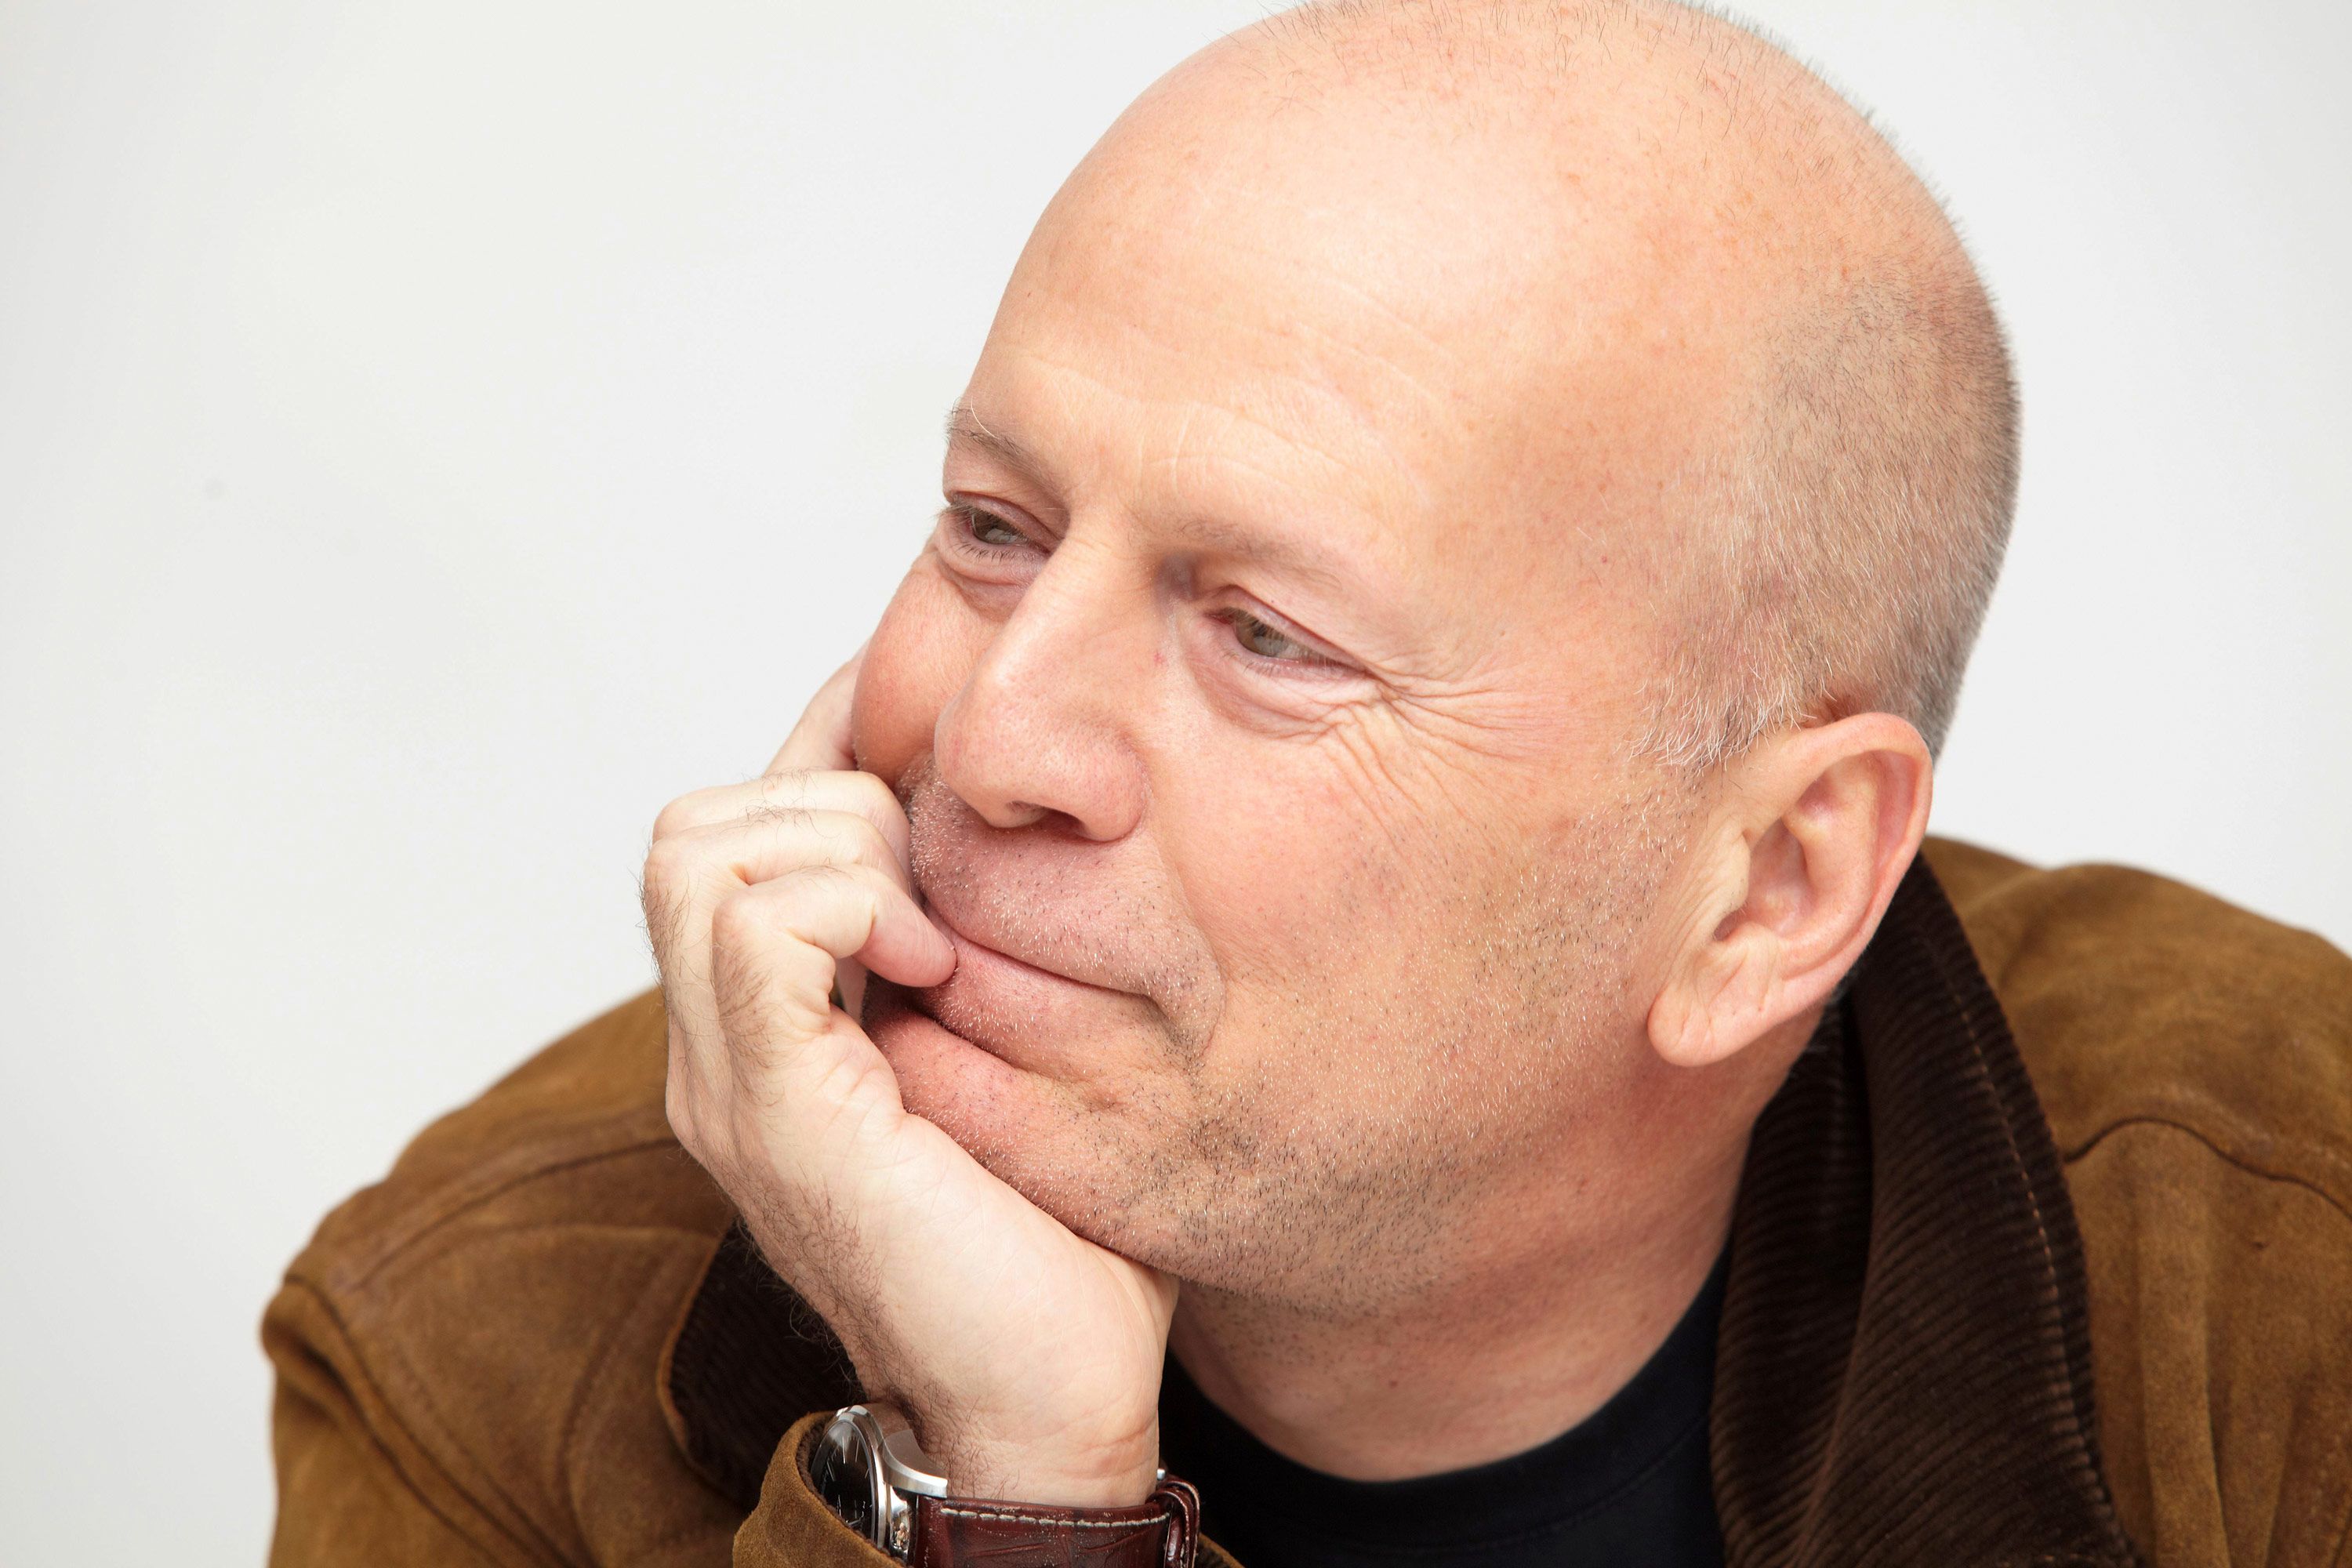 Bruce Willis attends a 2013 photo call for the film "A Good Day to Die Hard."